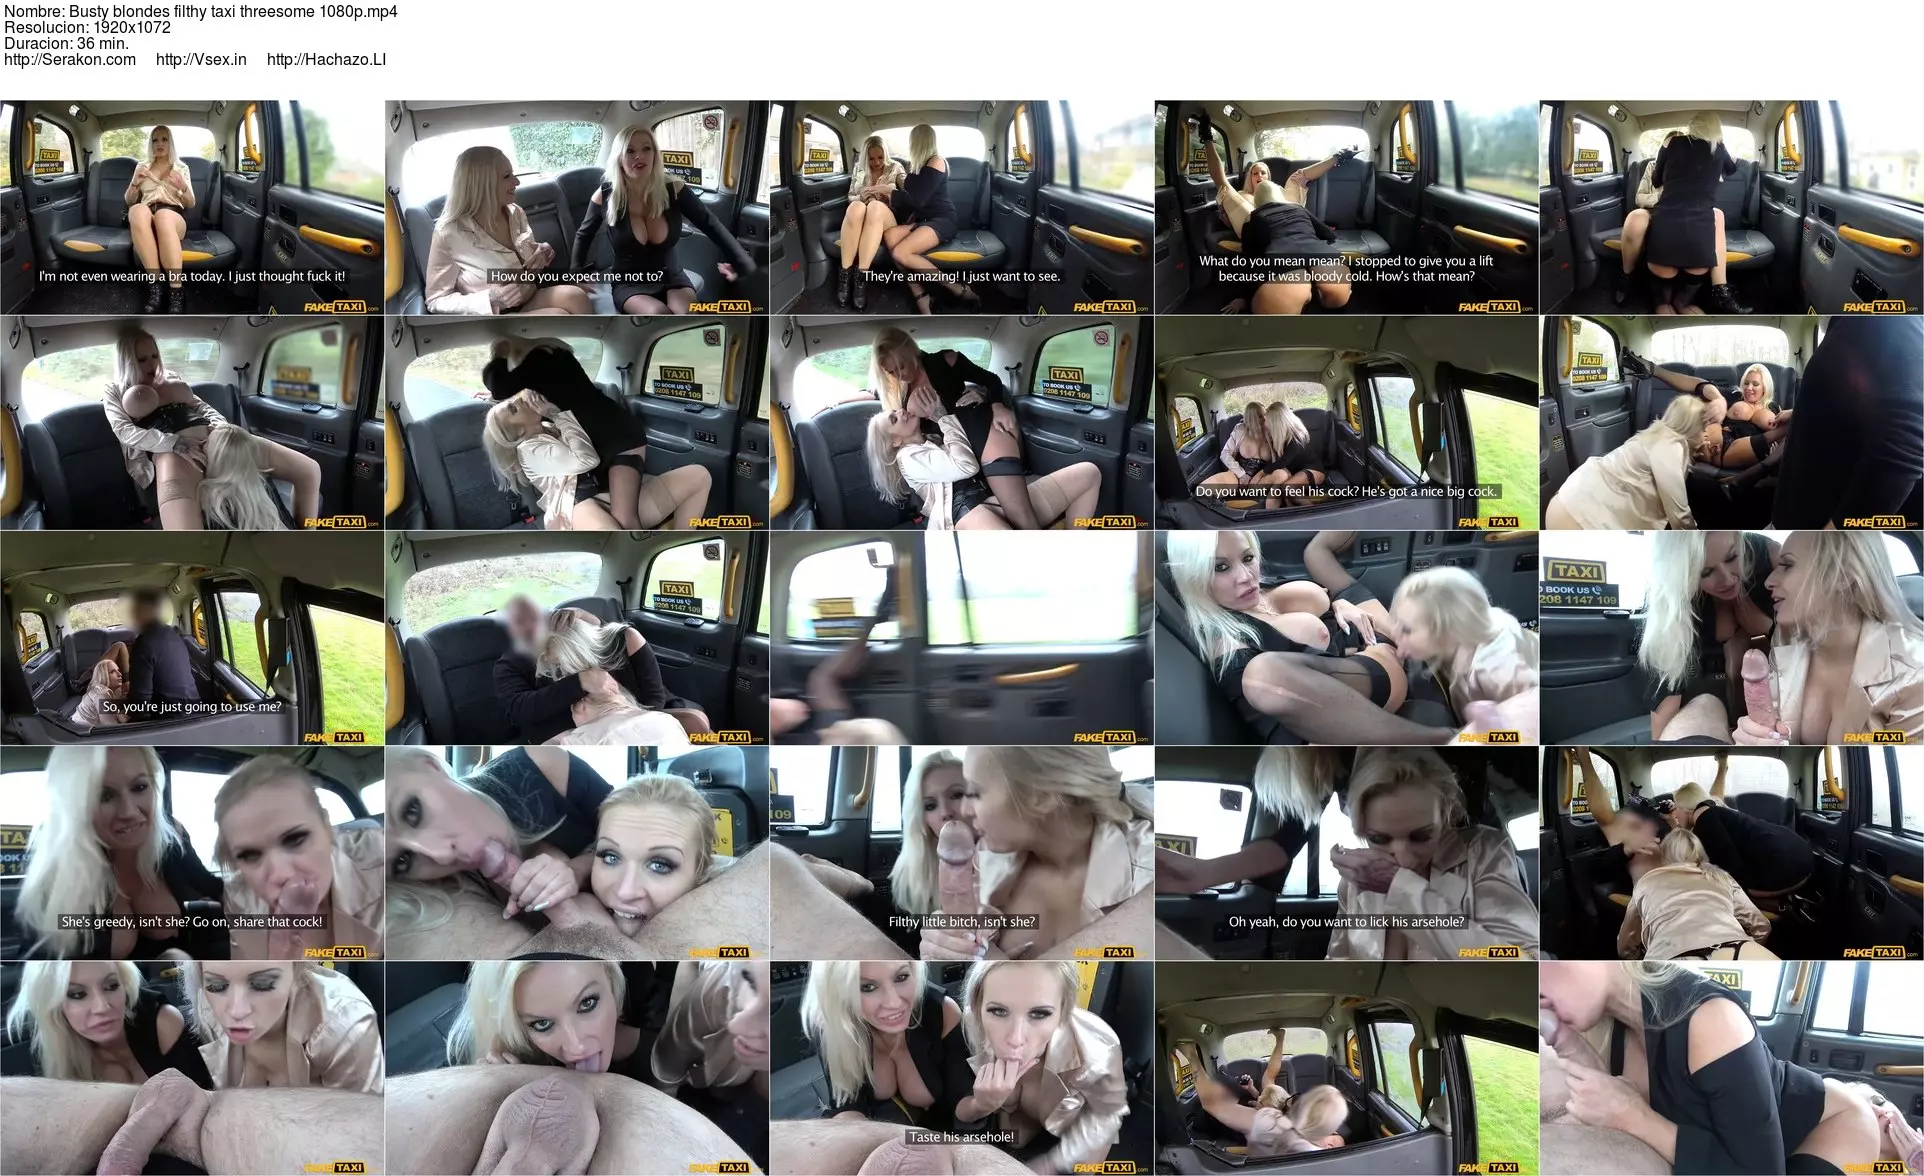 Filthy taxi threesome with kinky blondes